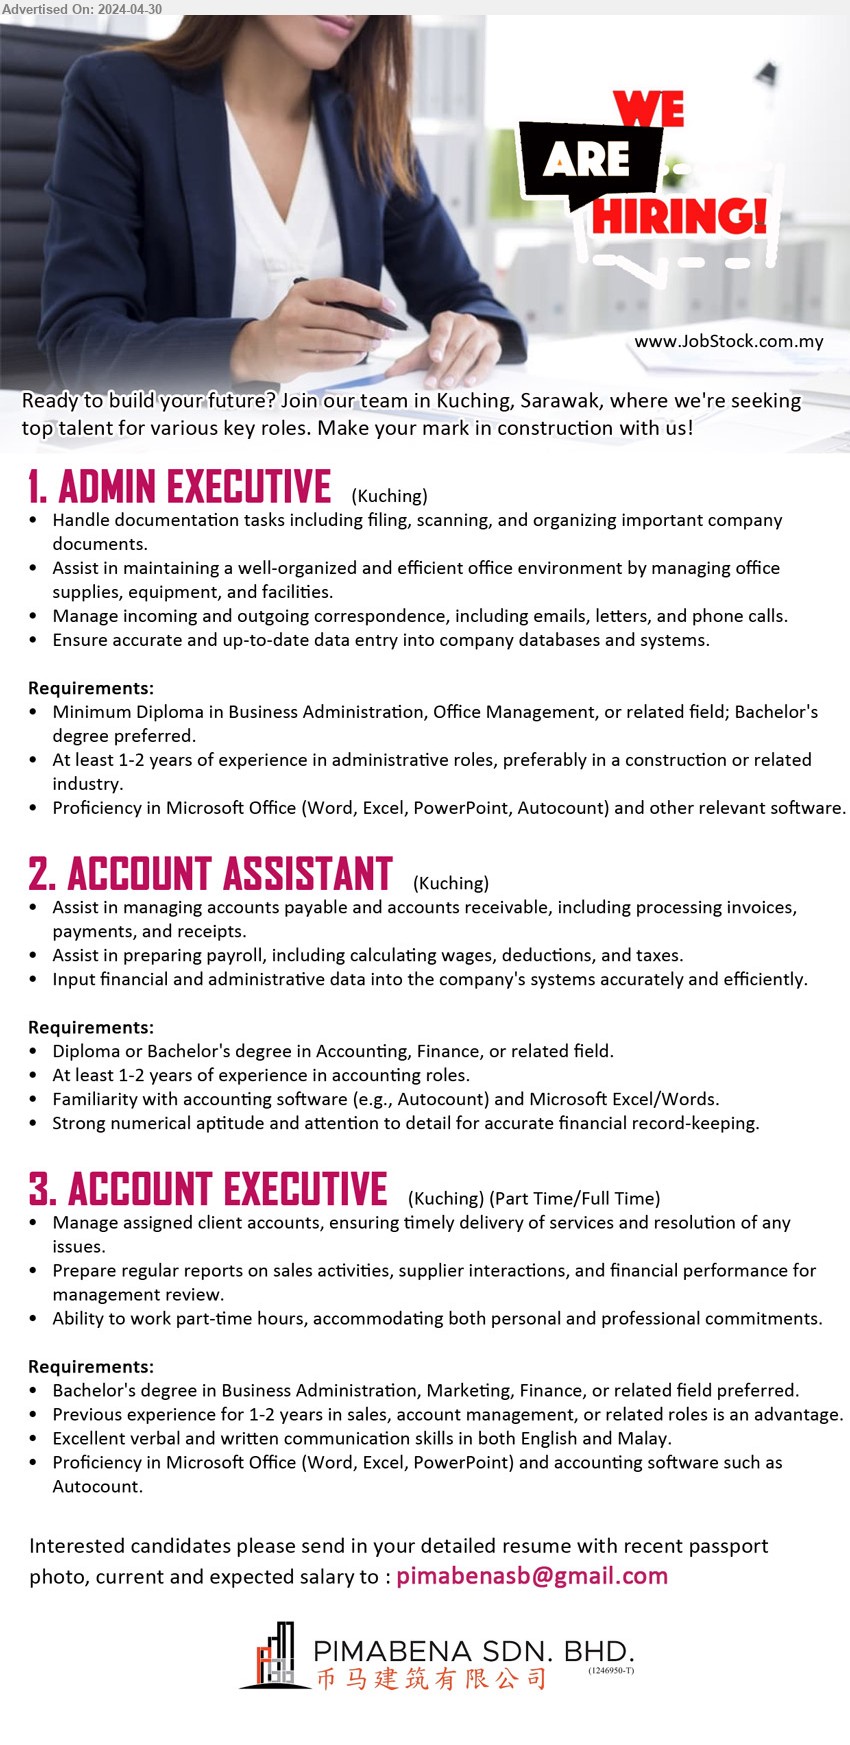 PIMABENA SDN BHD - 1. ADMIN EXECUTIVE (Kuching), Diploma in Business Administration, Office Management, 1-2 yrs. exp.,...
2. ACCOUNT ASSISTANT  (Kuching), Diploma or Bachelor's Degree in Accounting, Finance, 1-2 yrs. exp.,...
3. ACCOUNT EXECUTIVE  (Kuching), Bachelor's Degree in Business Administration, Marketing, Finance, 1-2 yrs. exp.,...
Email resume to ...